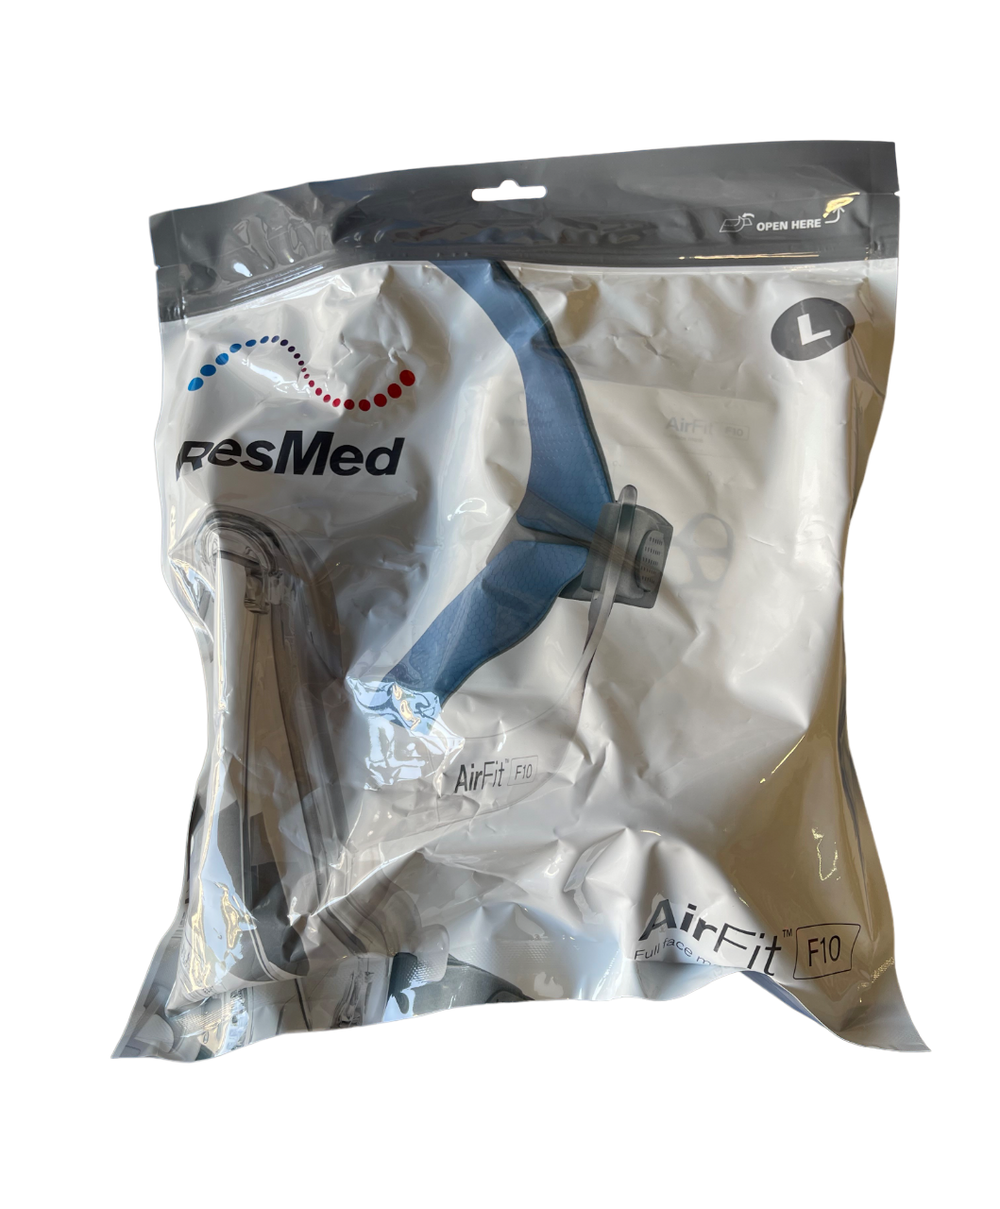 Resmed AirFit F10 Full Face Mask System with Headgear (Non-Retail Packaging)